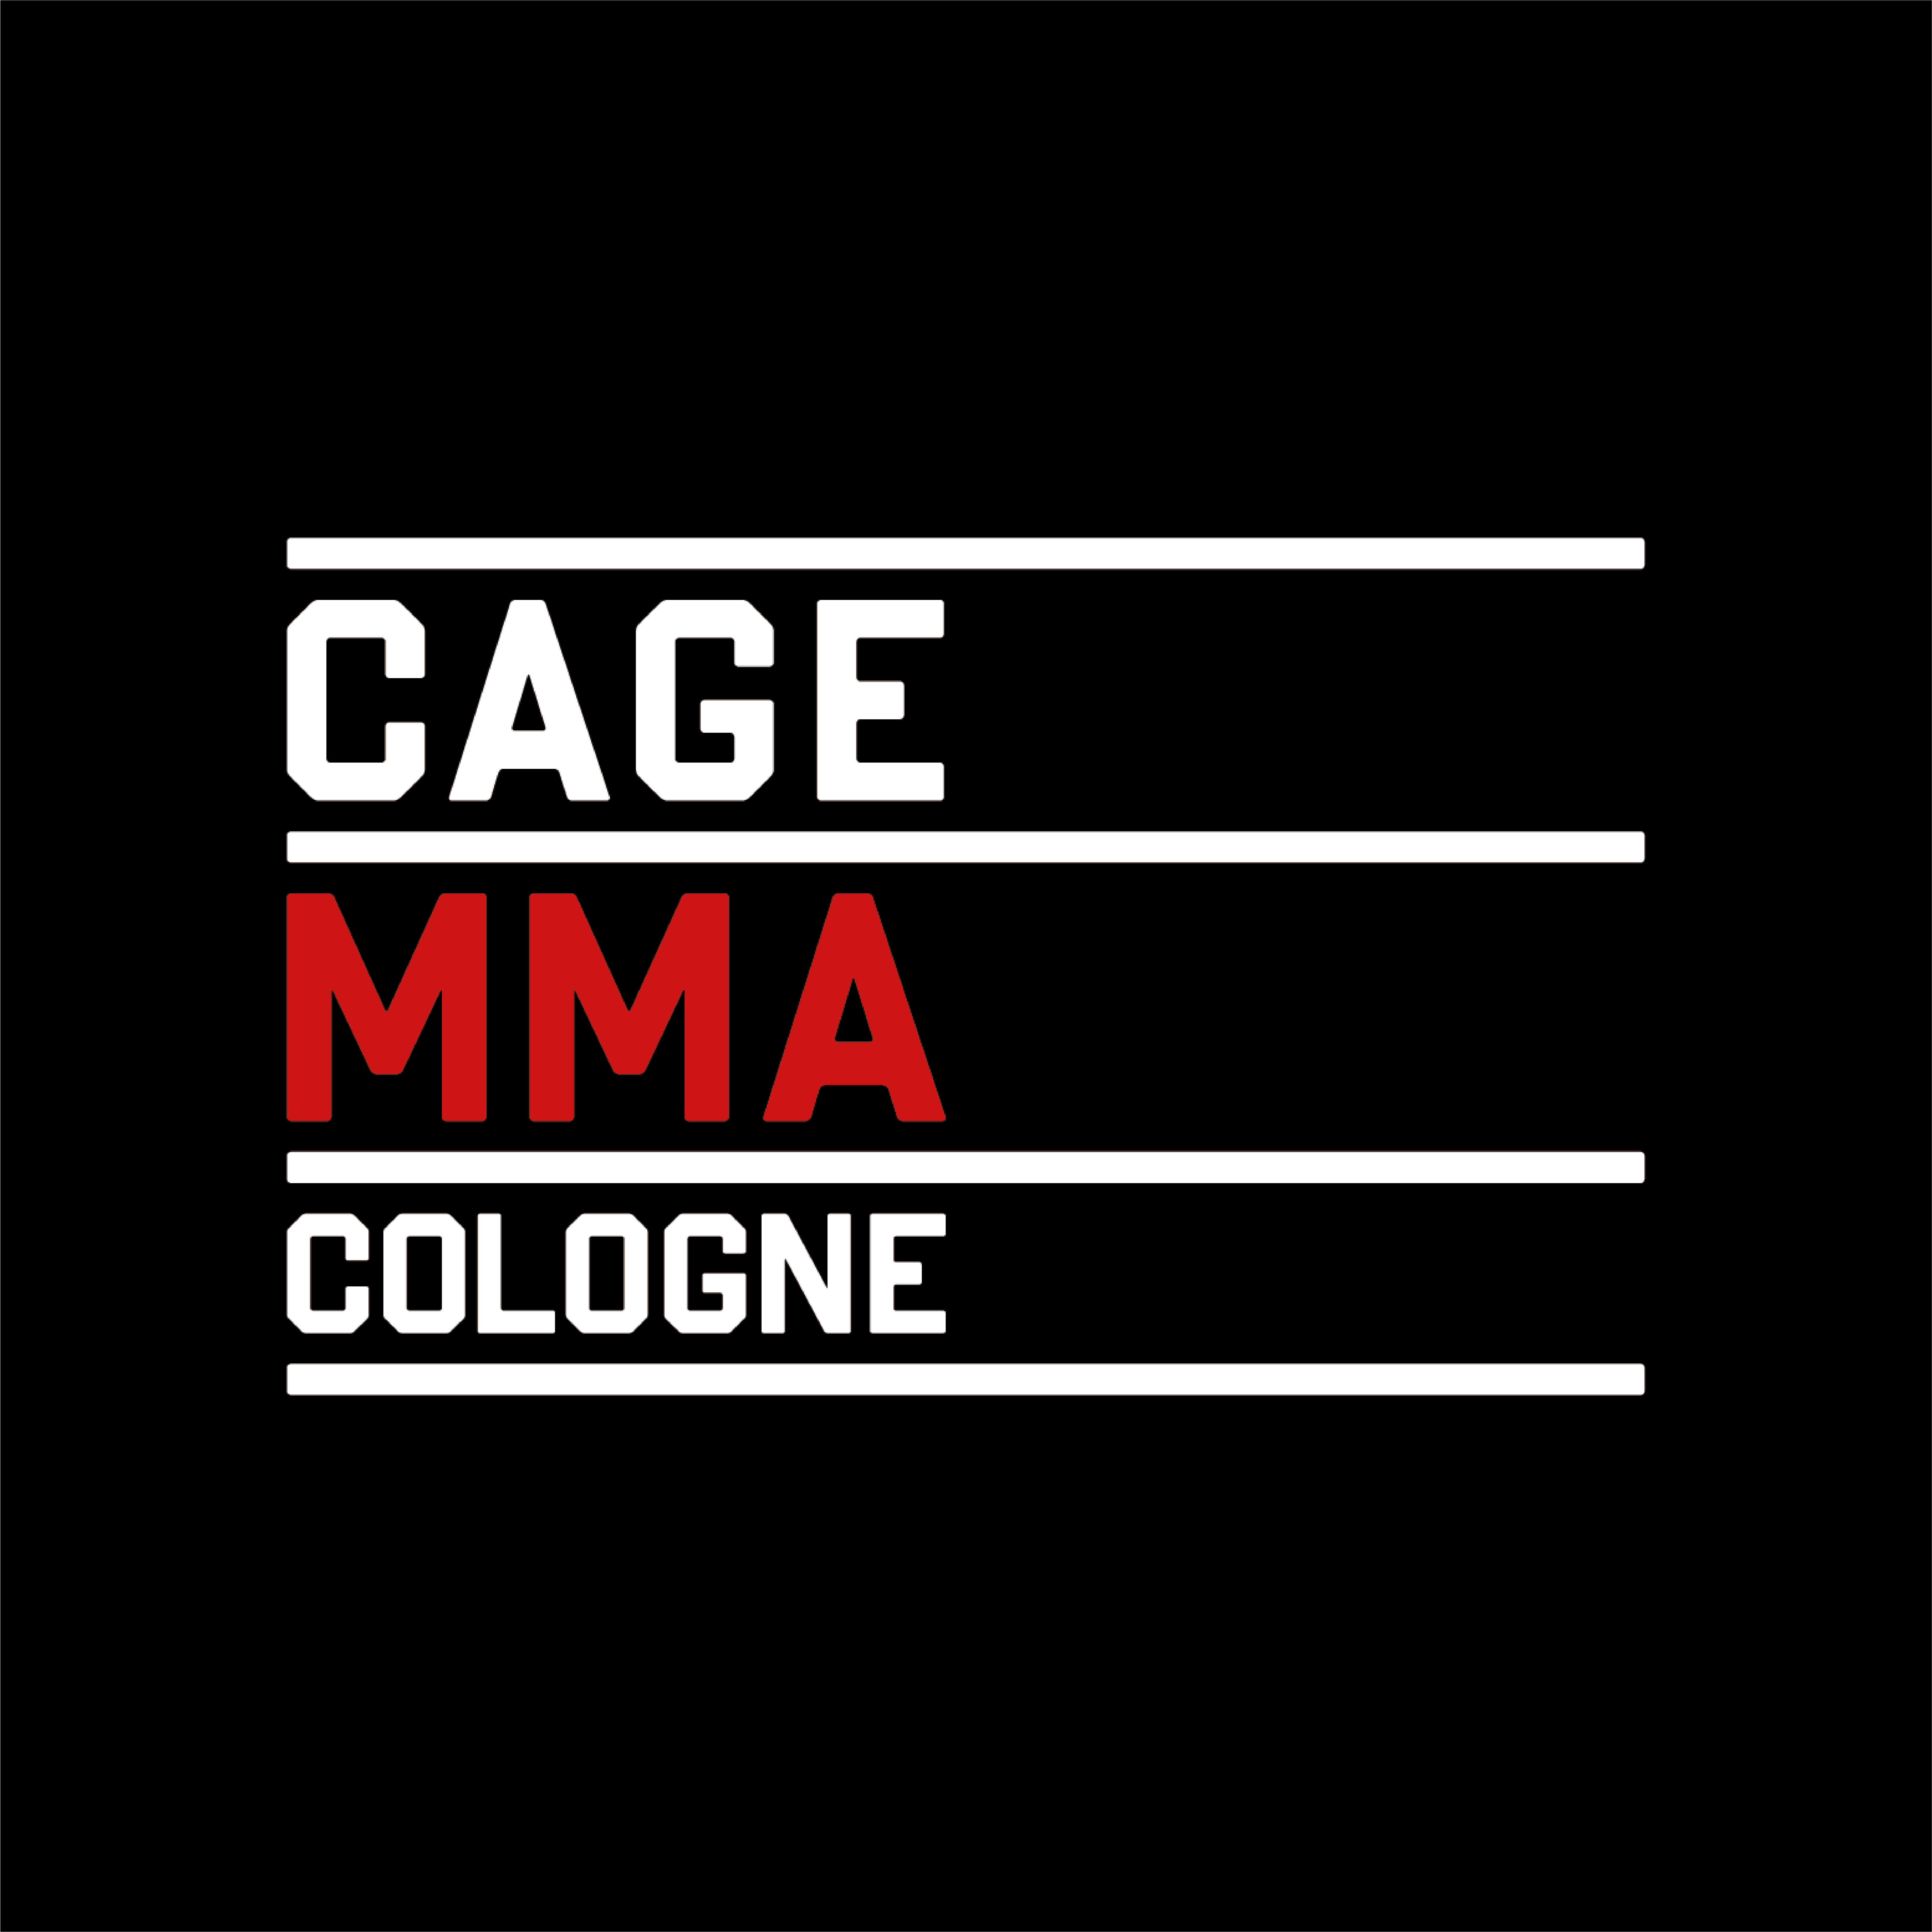 Logo CAGE MMA COLOGNE NIEHL